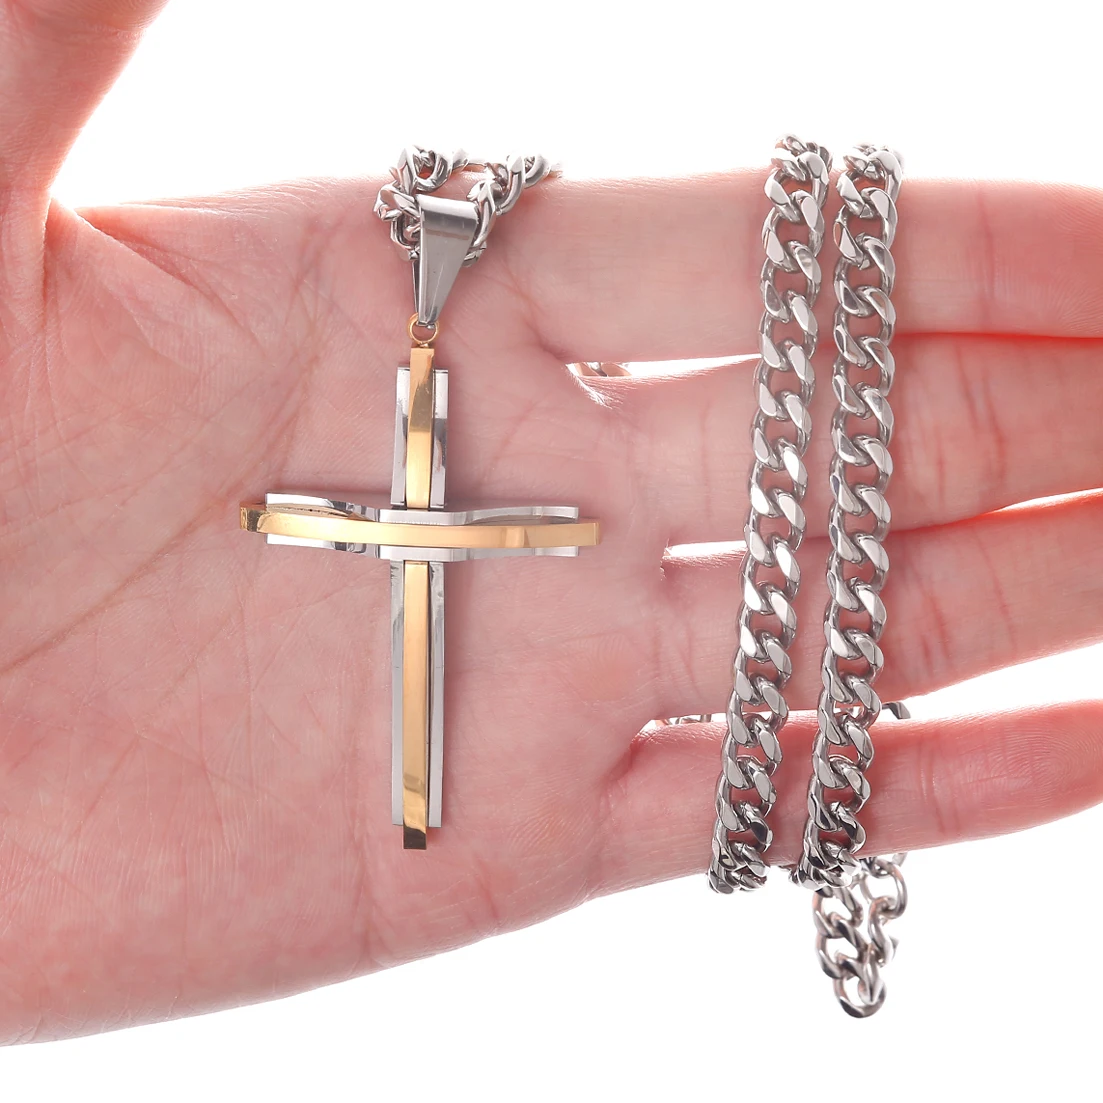 

Granny Chic Silver Gold Tone Stainless Steel Crucifix Pendant Necklace Cross Pendant with Cuban Link Chain 6mm for Men Women